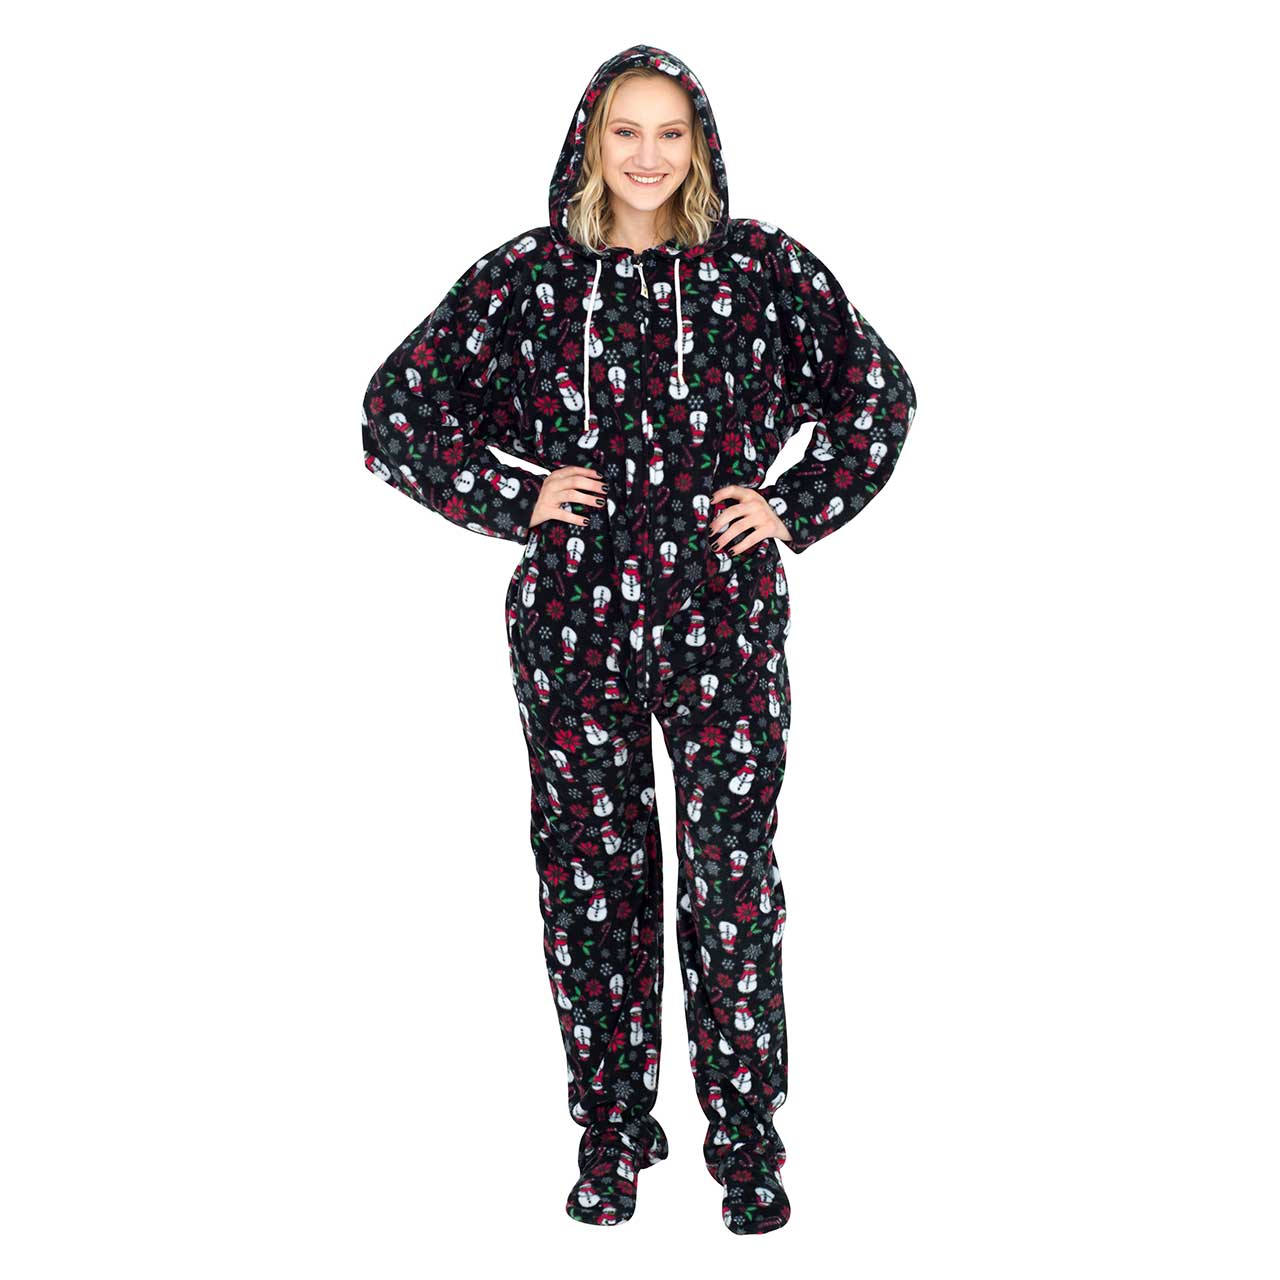 Snowmen and Candy Canes Black Ugly Christmas Pajama Suit with Hood,New Products : uglyschristmassweater.com